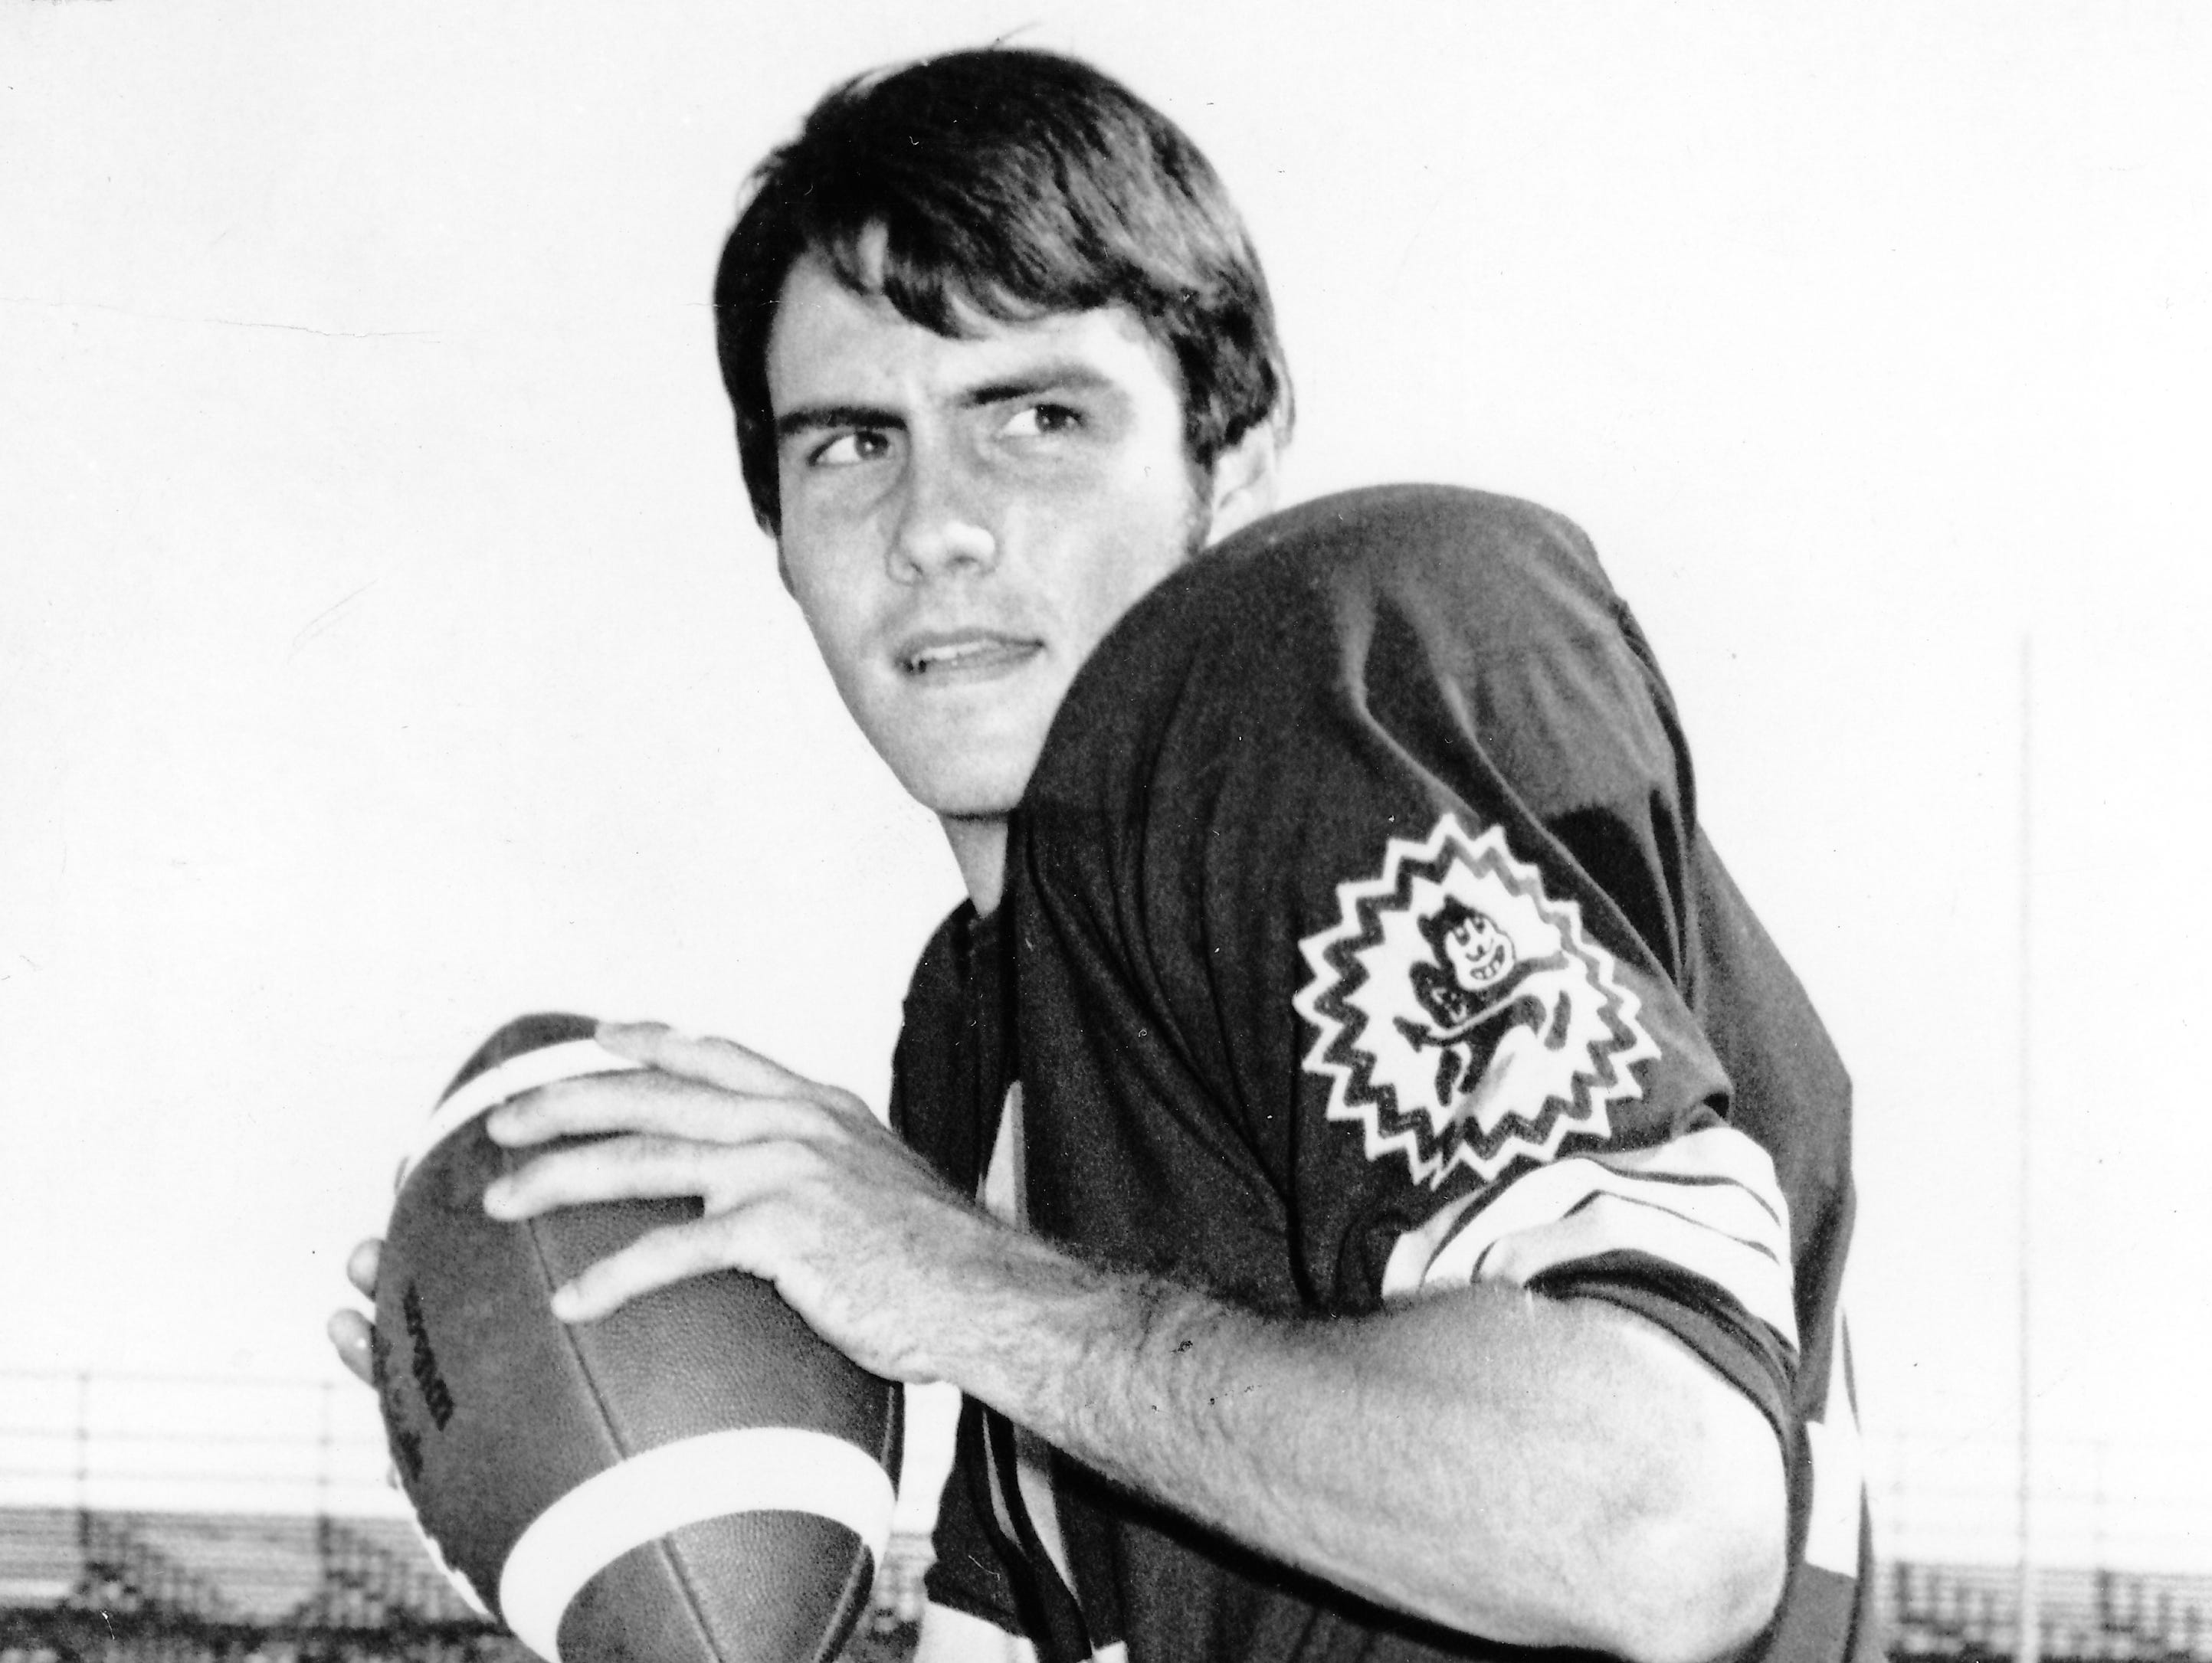 Here are Richard Obert's choices for Westwood’s 10 greatest football players: